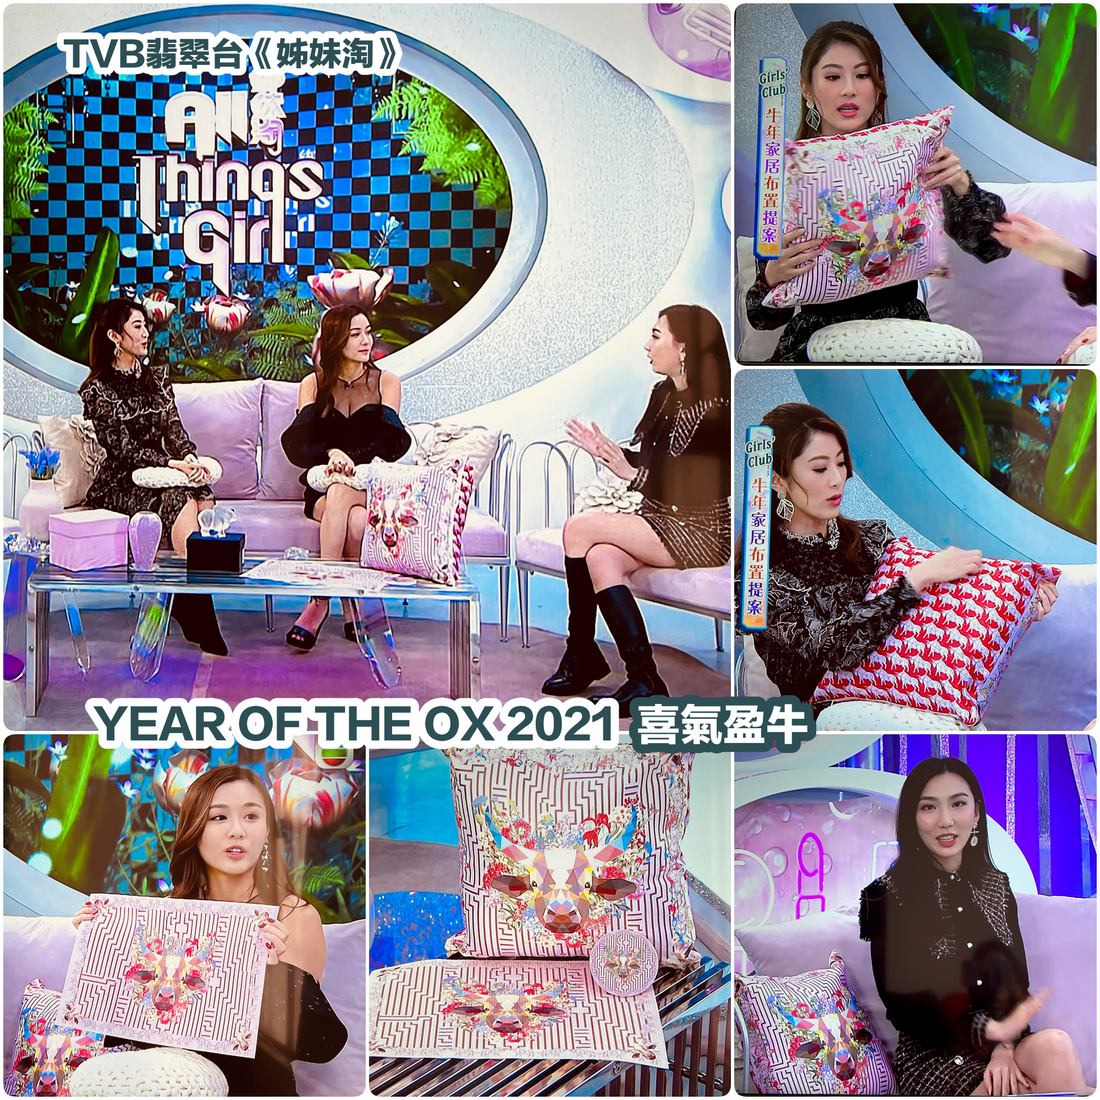 JDF  HOME  DECOR  Limited Edition Year of the OX 2021 was recommended by TVB Jade Channel “All Things Girl” - JARDIN DES FONTAINES